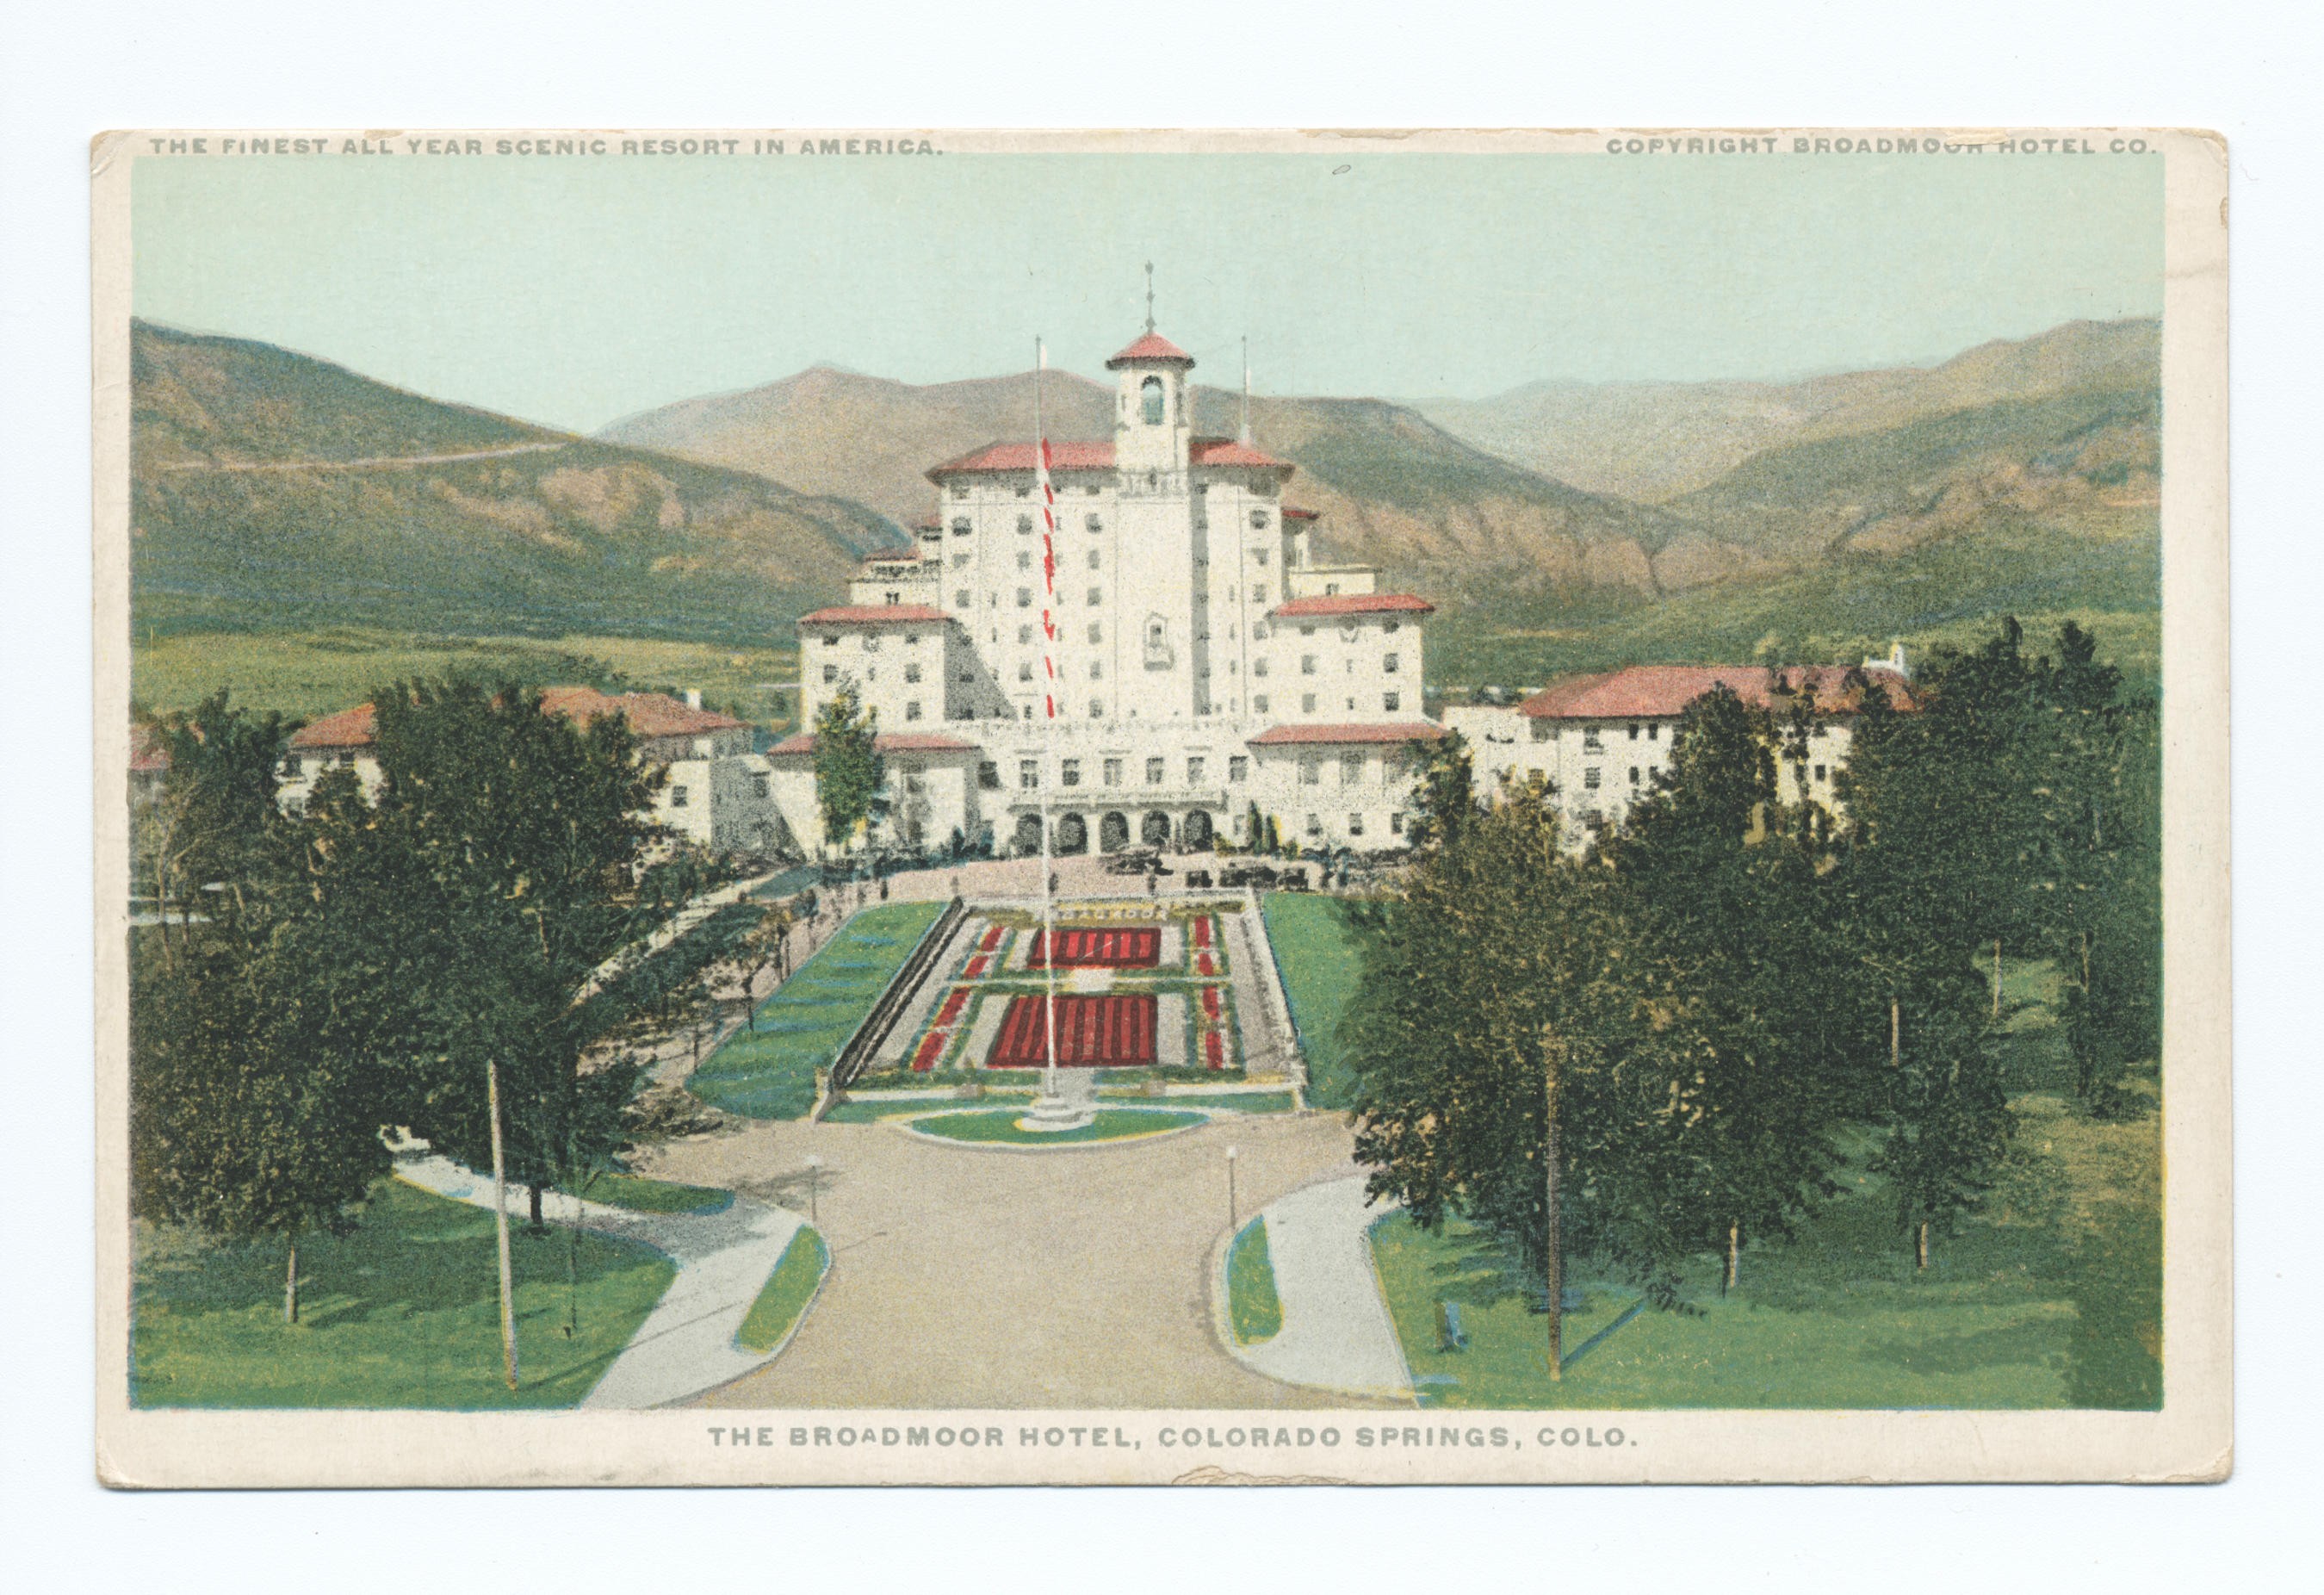 An old postcard for The Broadmoor, which calls it the “finest all year scenic resort in America”. Picture: Alamy